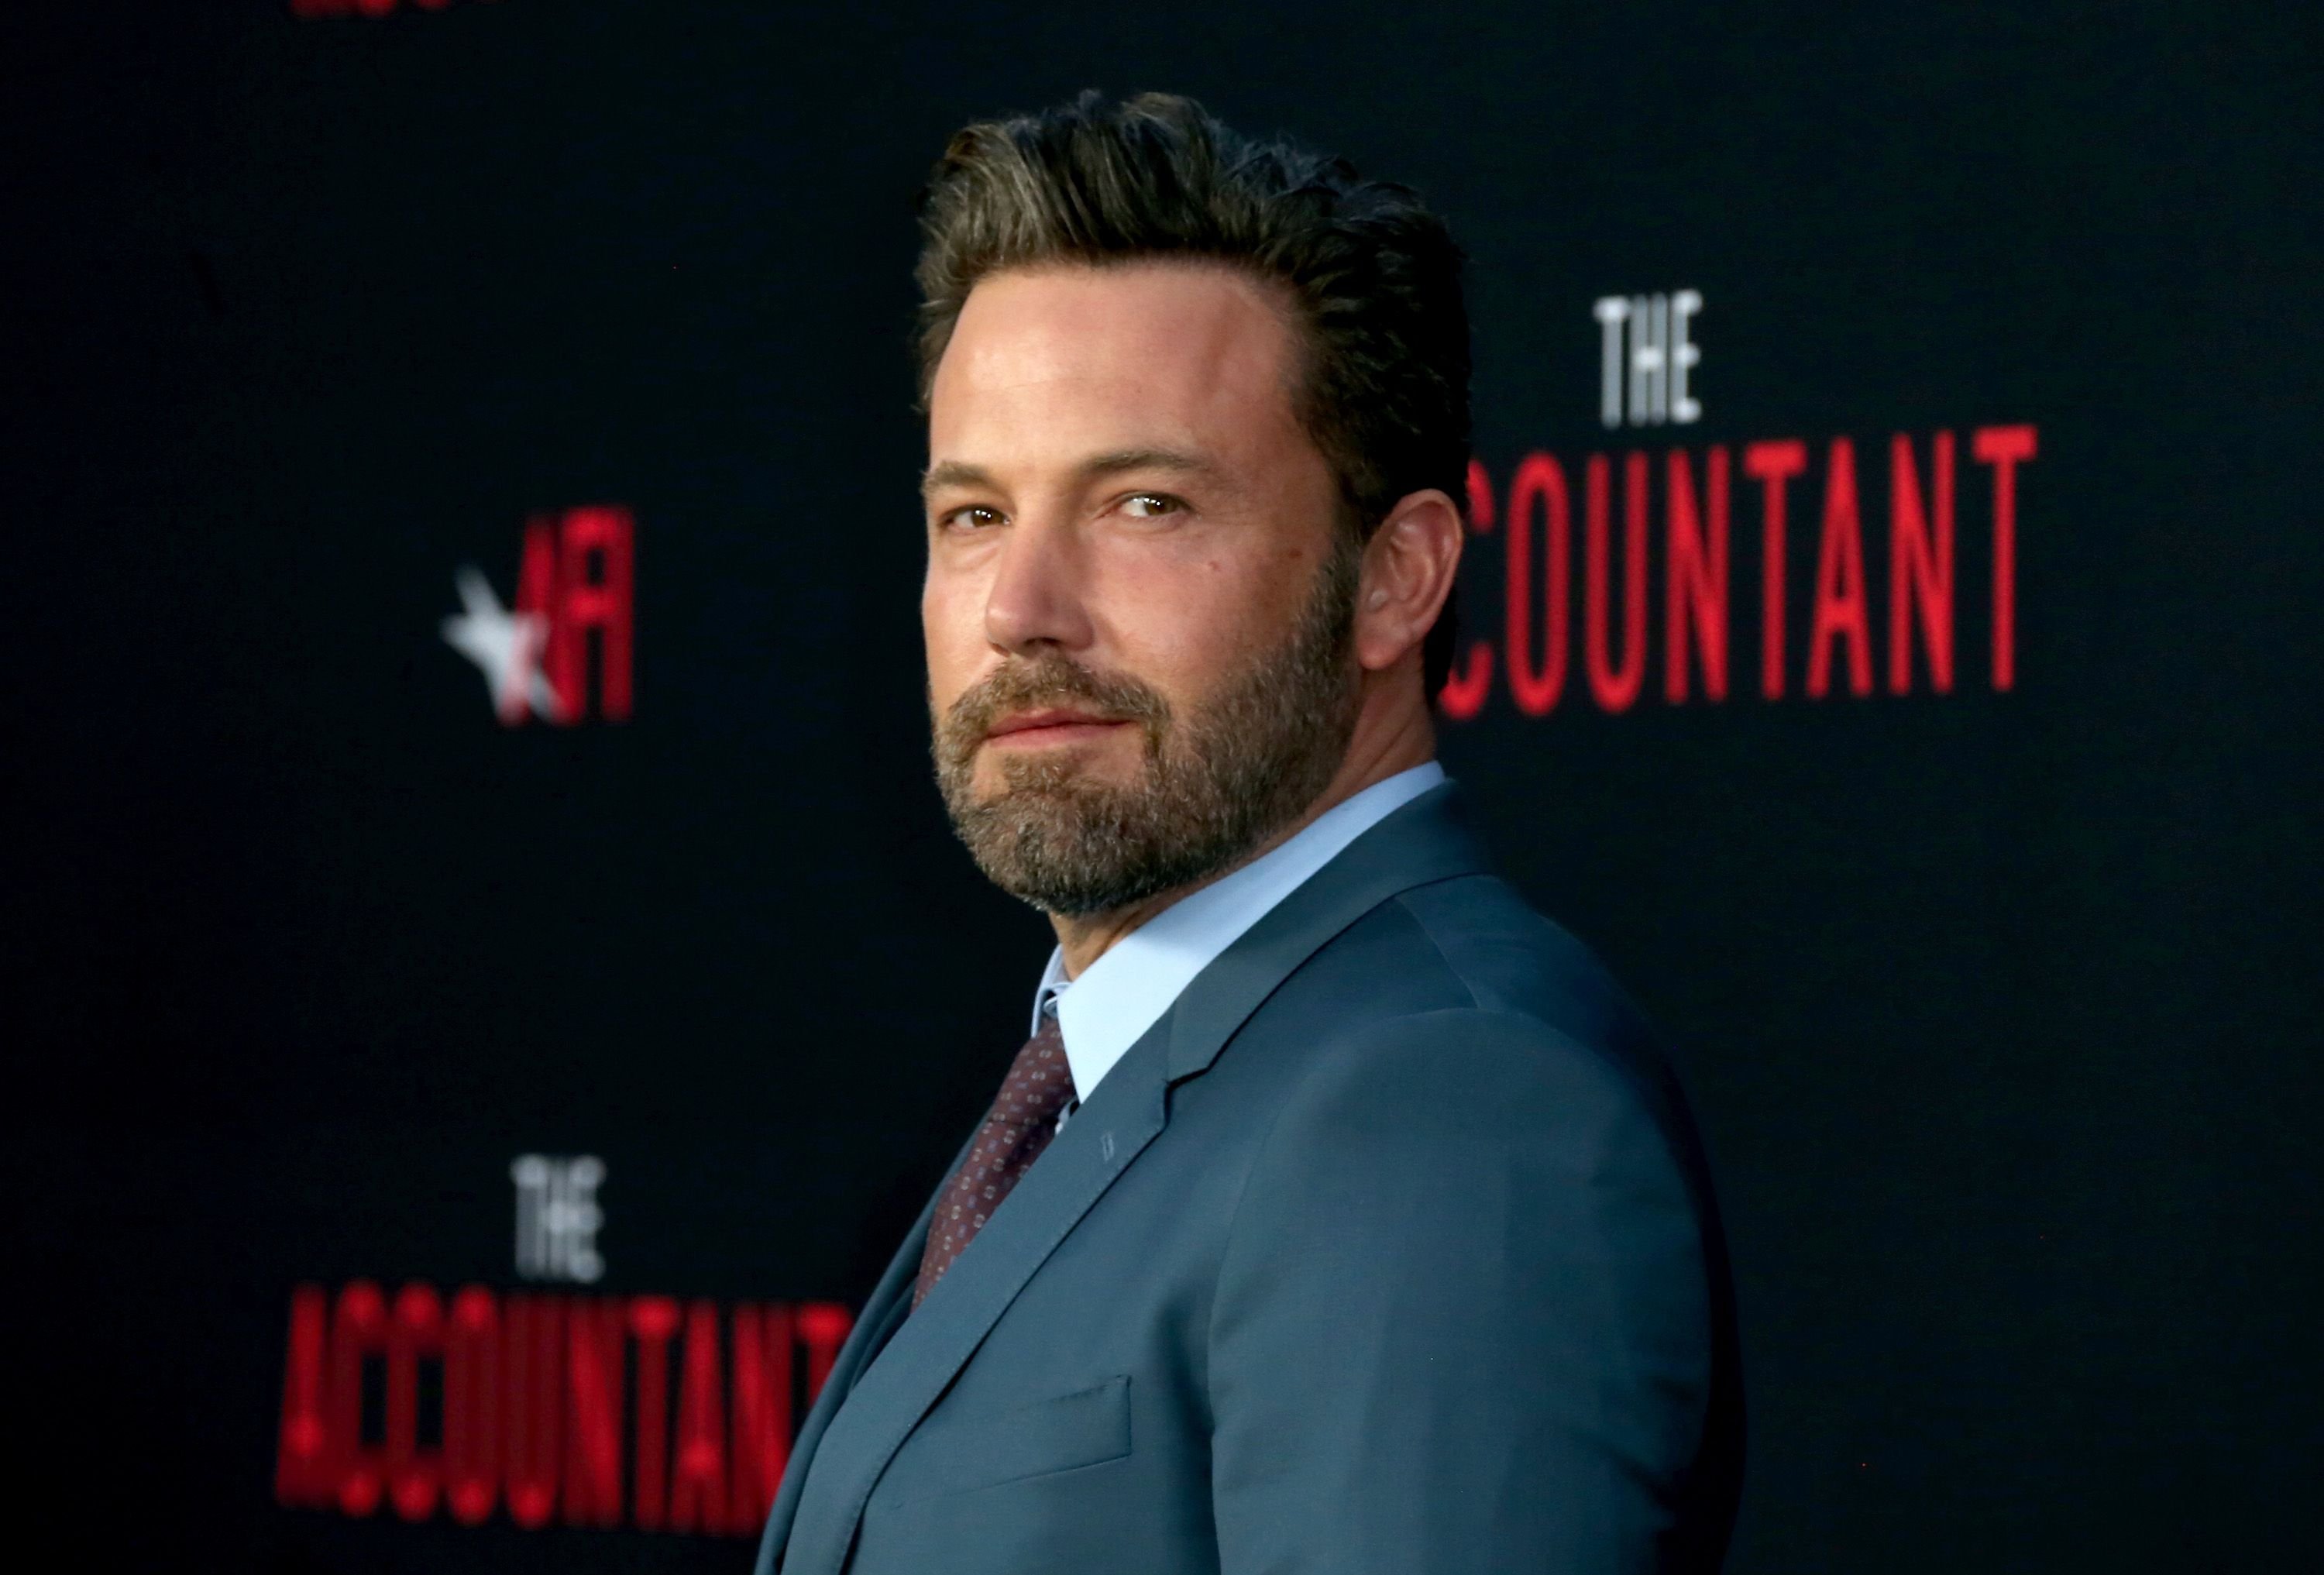 Ben Affleck at the premiere of "The Accountant" at TCL Chinese Theatre on October 10, 2016, in Hollywood, California. | Source: Getty Images